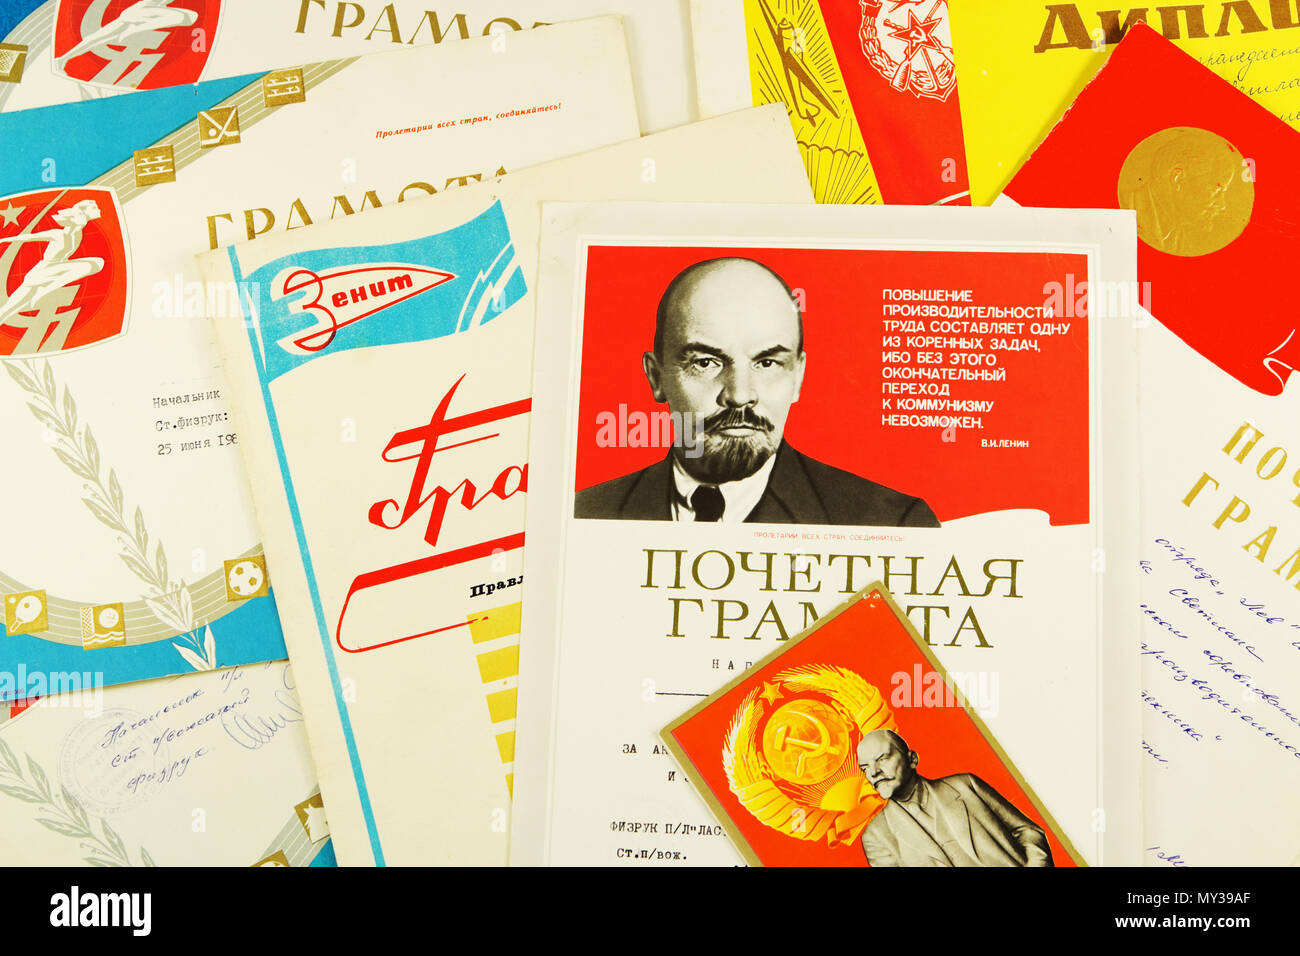 Soviet Honorary certificates for merits in children's sports in the summer pioneer camp with a portrait of Lenin V.I., USSR, 1980s Stock Photo